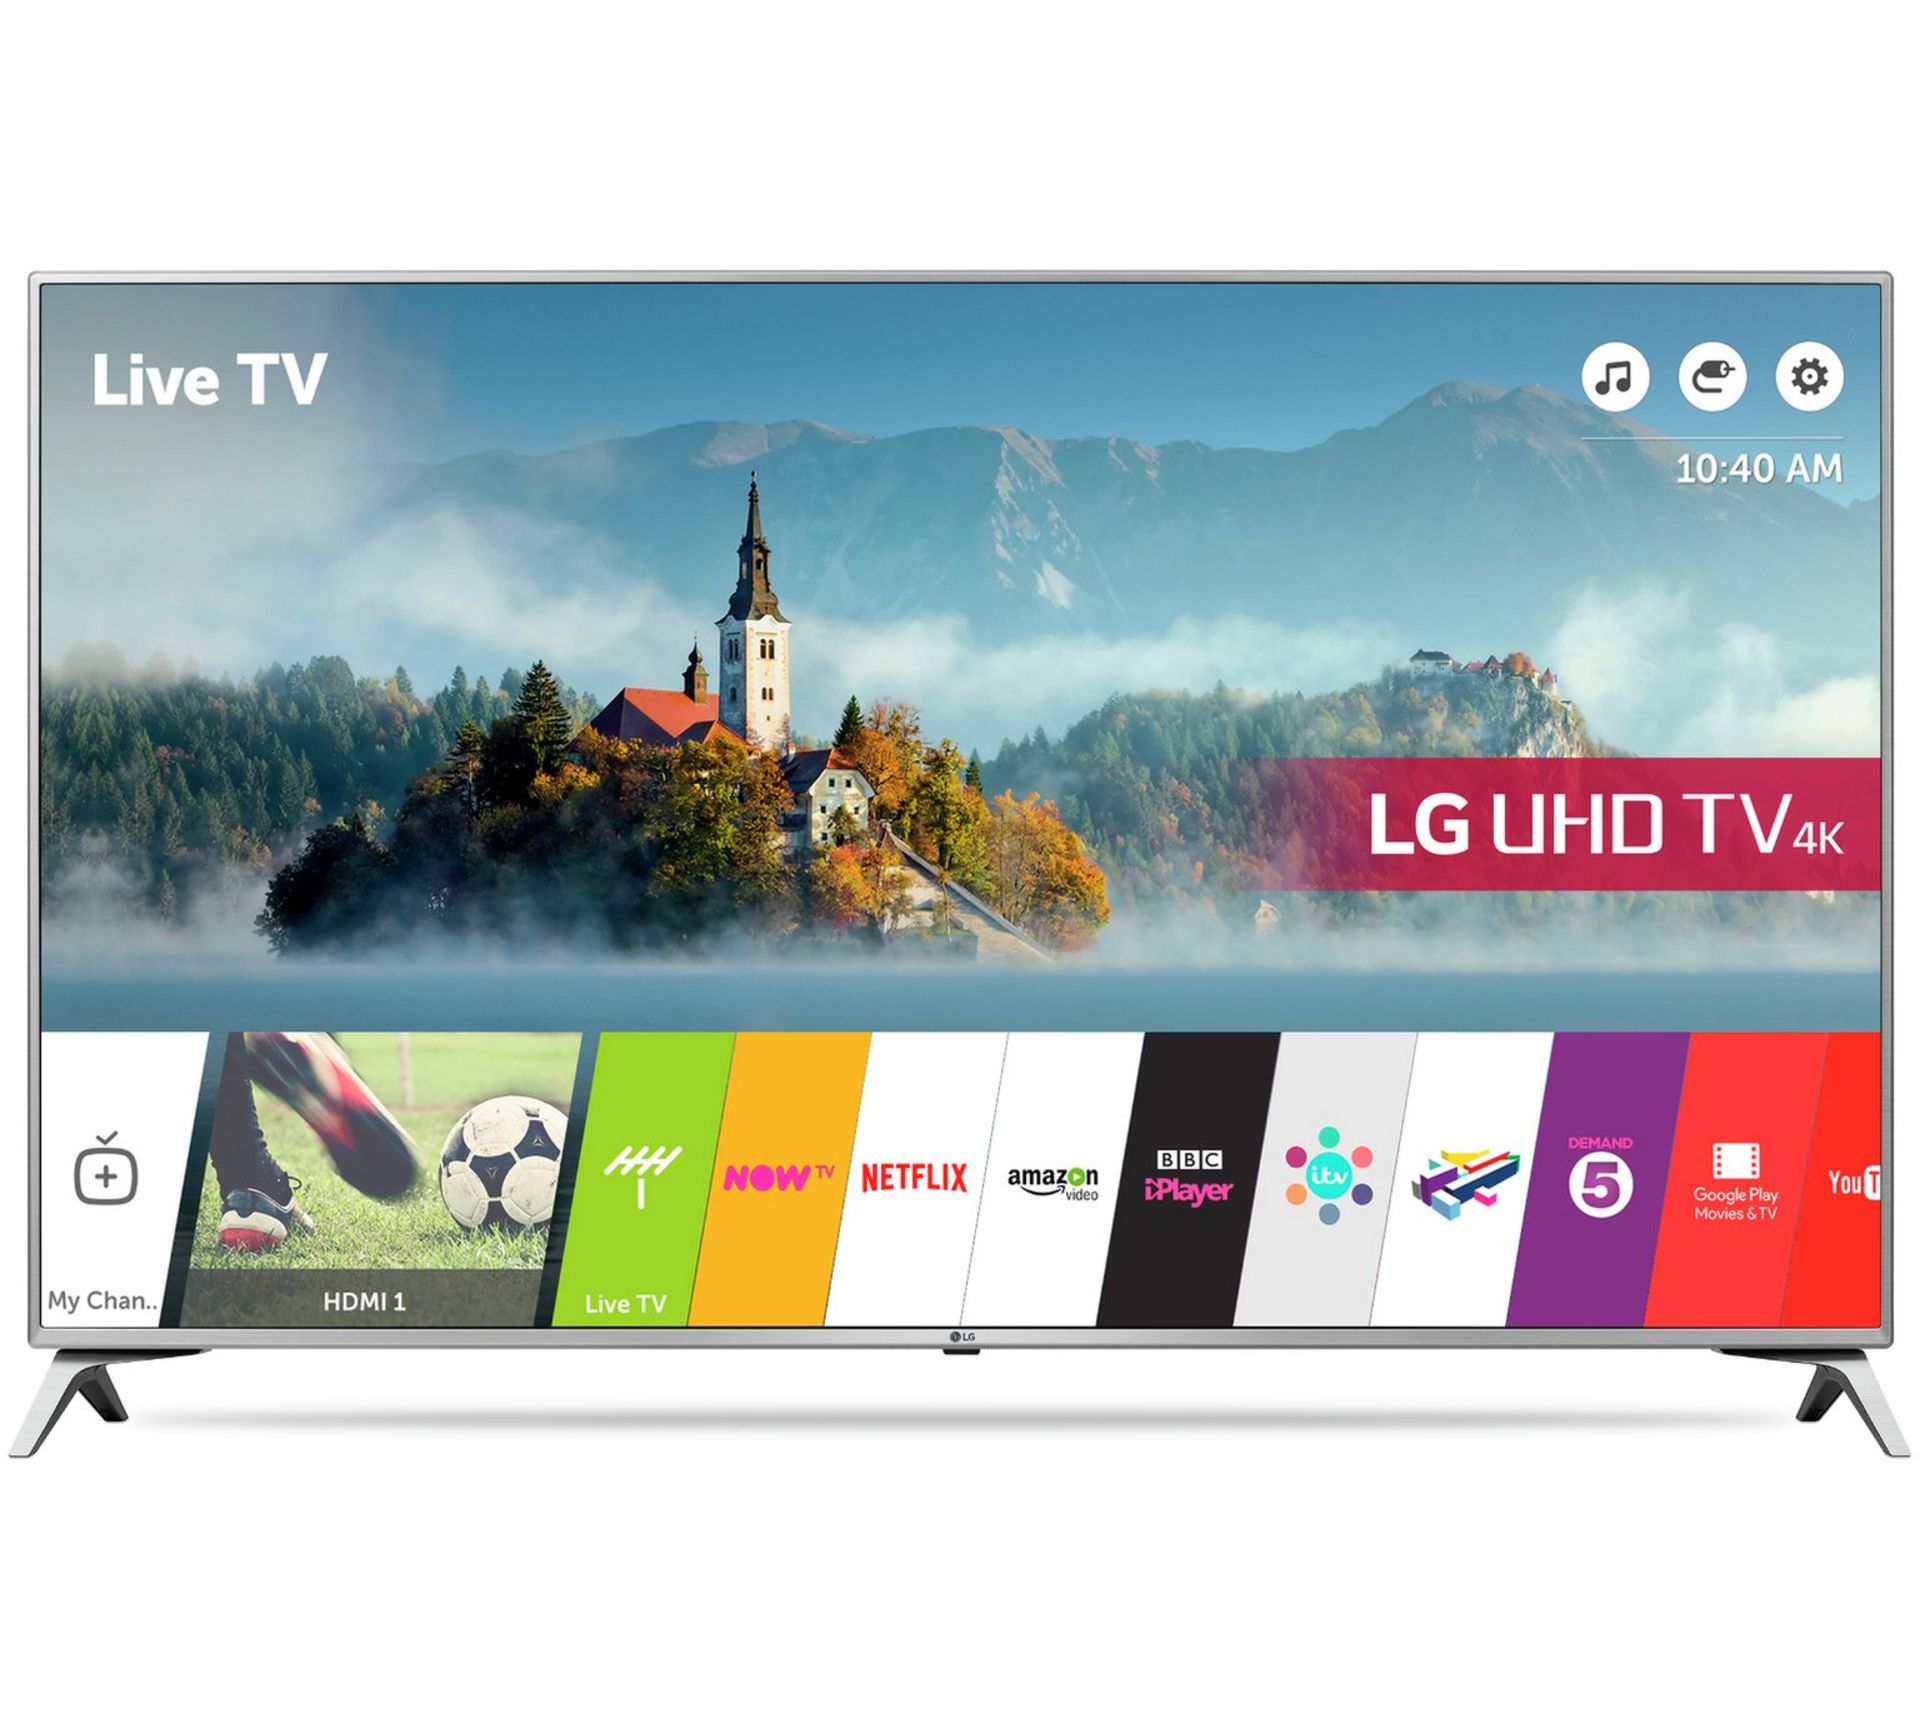 V Grade A LG 43" 4K Ultra HD Smart TV With HDR - Built In WiFi - Bluetooth - WebOS Operating